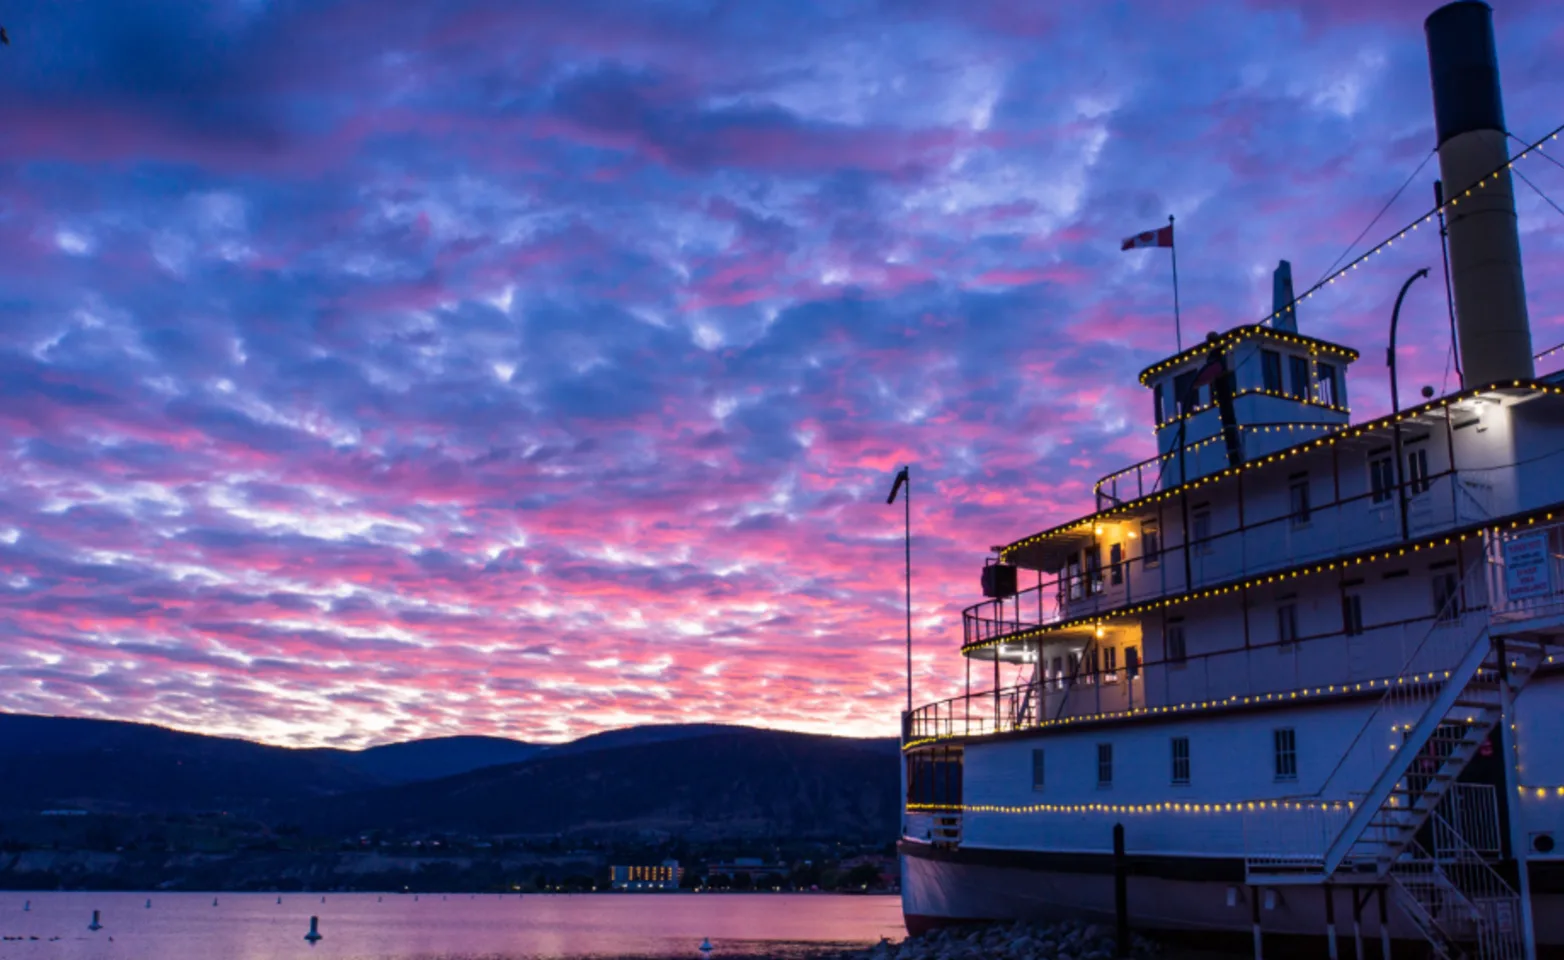 A steam boat next to a colorful sunset in Penticton, BC